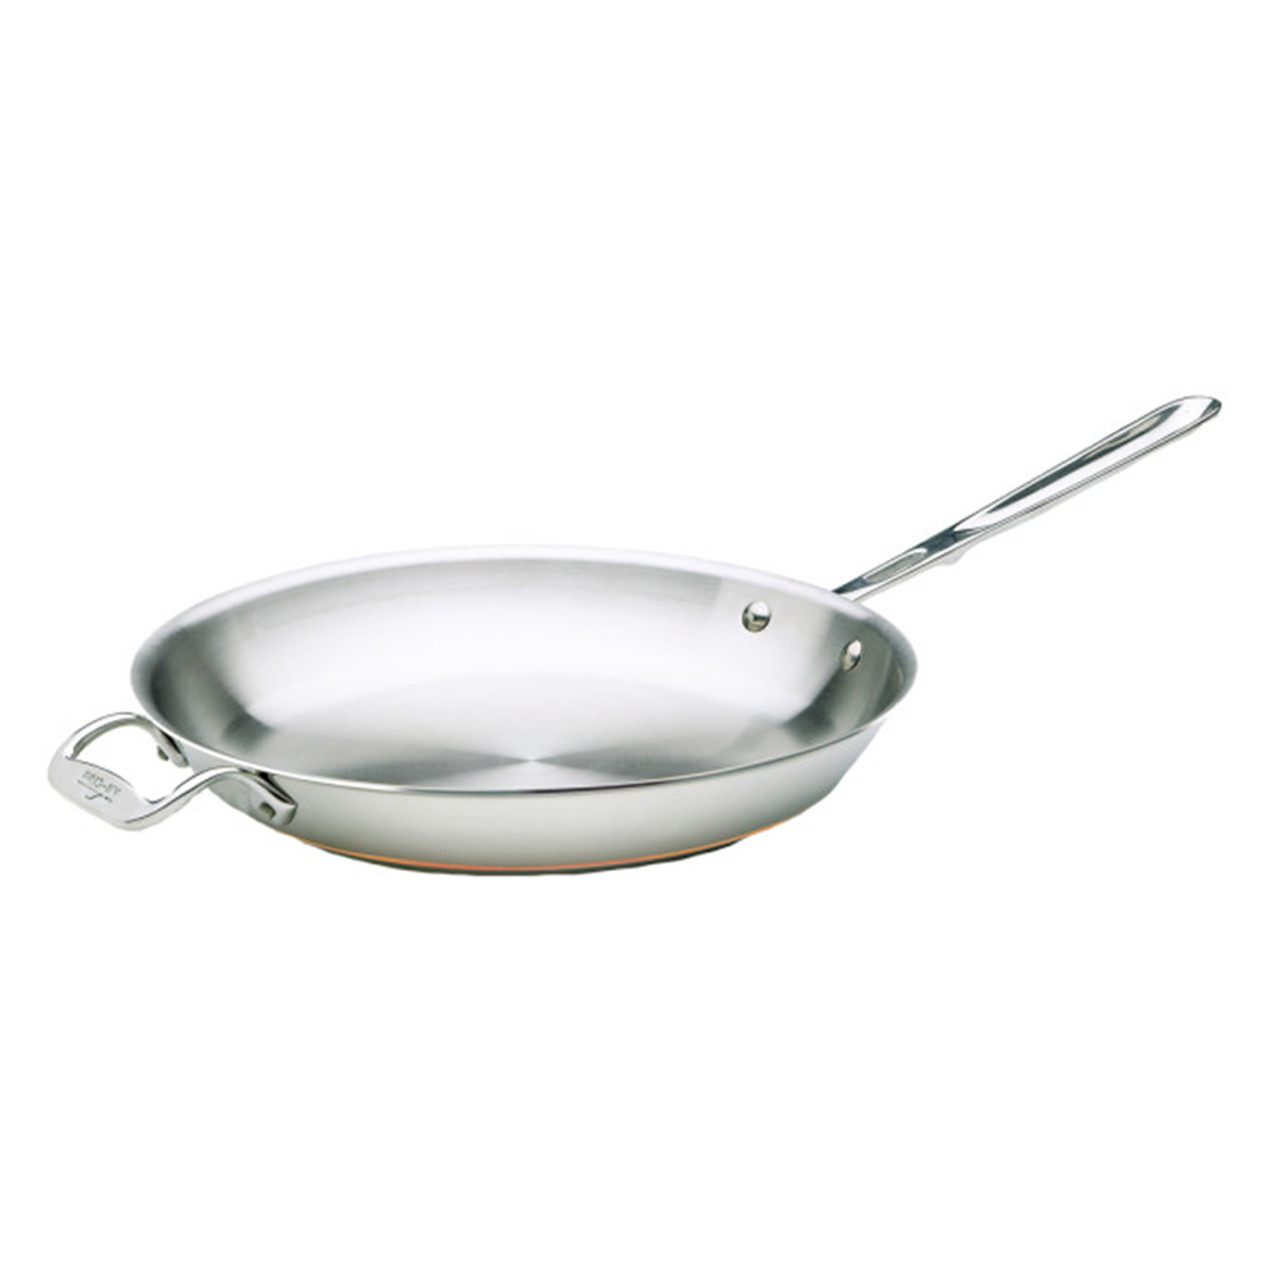 https://cdn11.bigcommerce.com/s-hccytny0od/images/stencil/1280x1280/products/508/1928/all-clad-copper-core-fry-pan-12-inch__63907.1511049231.jpg?c=2?imbypass=on